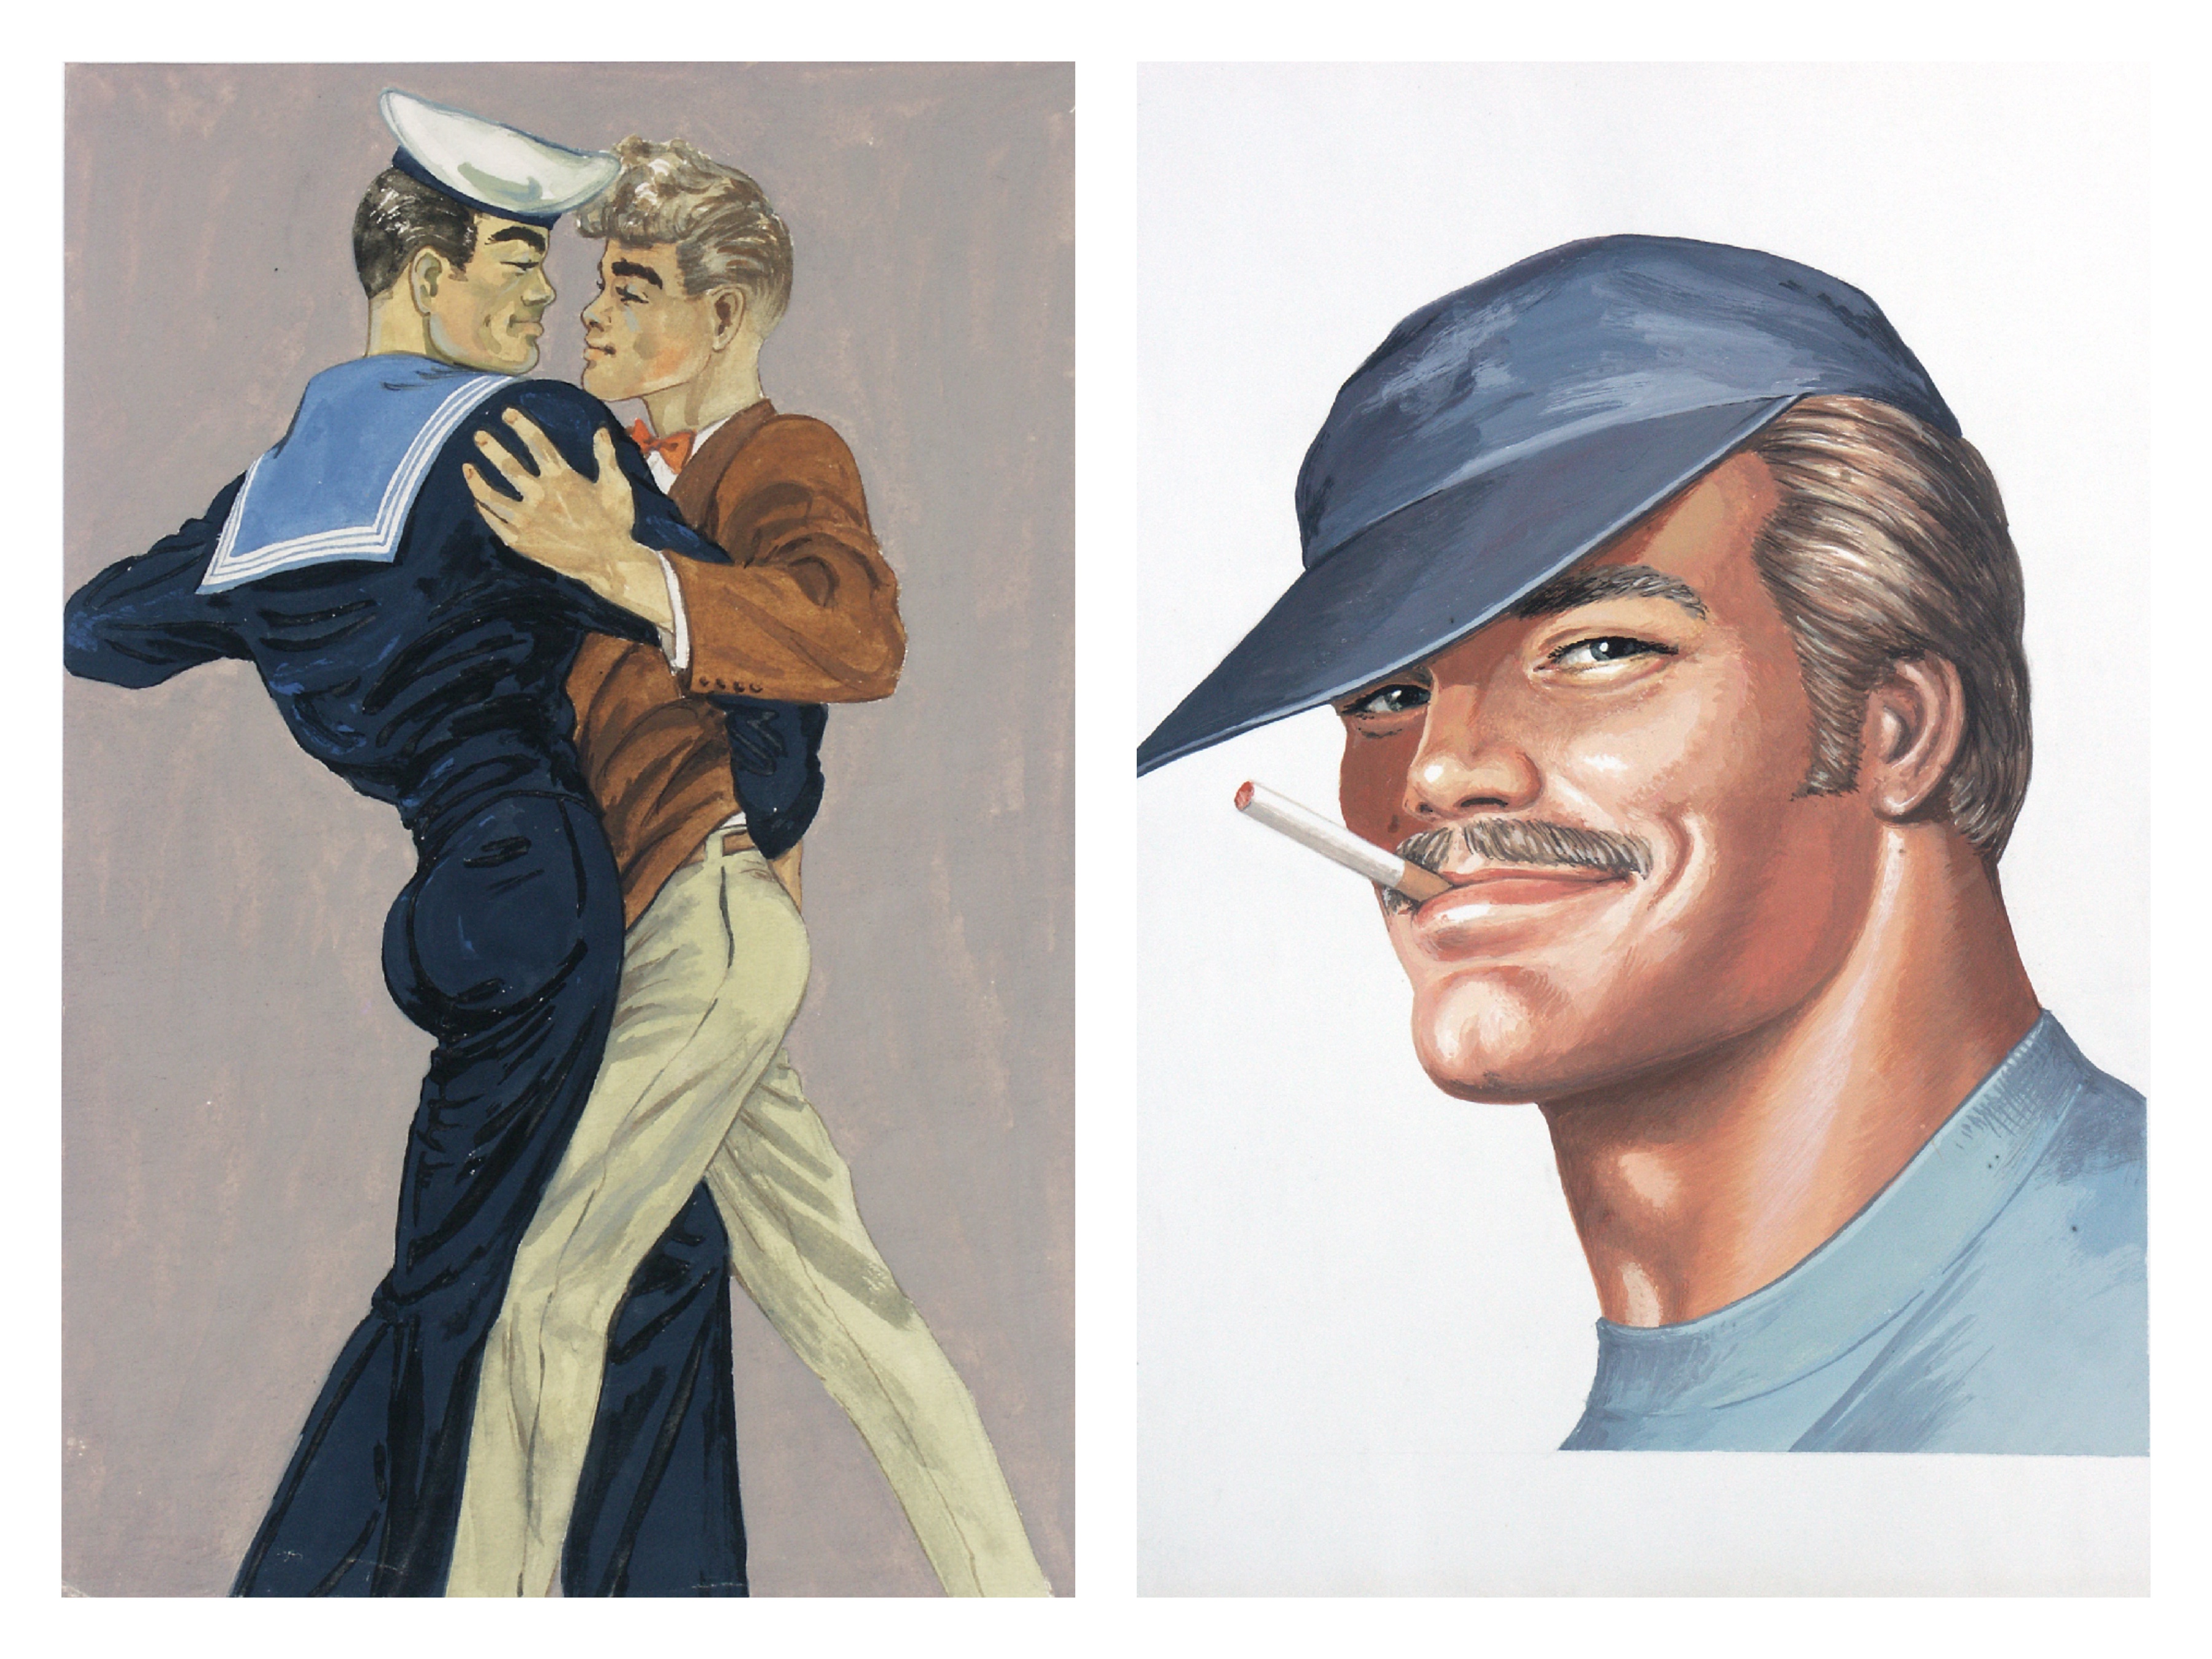 Tom of Finland's Explicit Art Radically Changed How We View ...